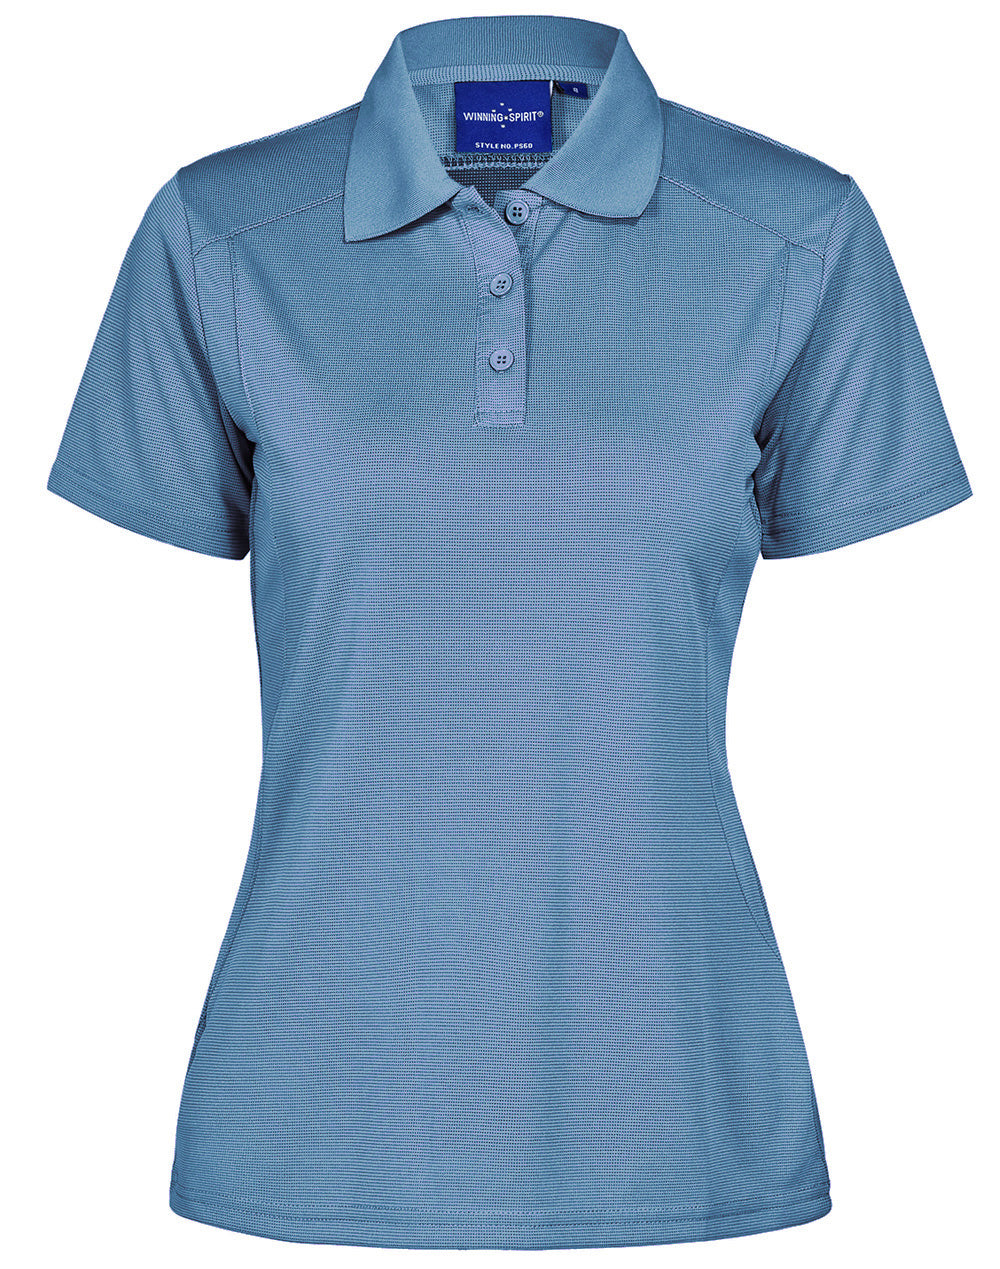 Winning Spirit Ladies Bamboo Charcoal S/S Polo - PS60